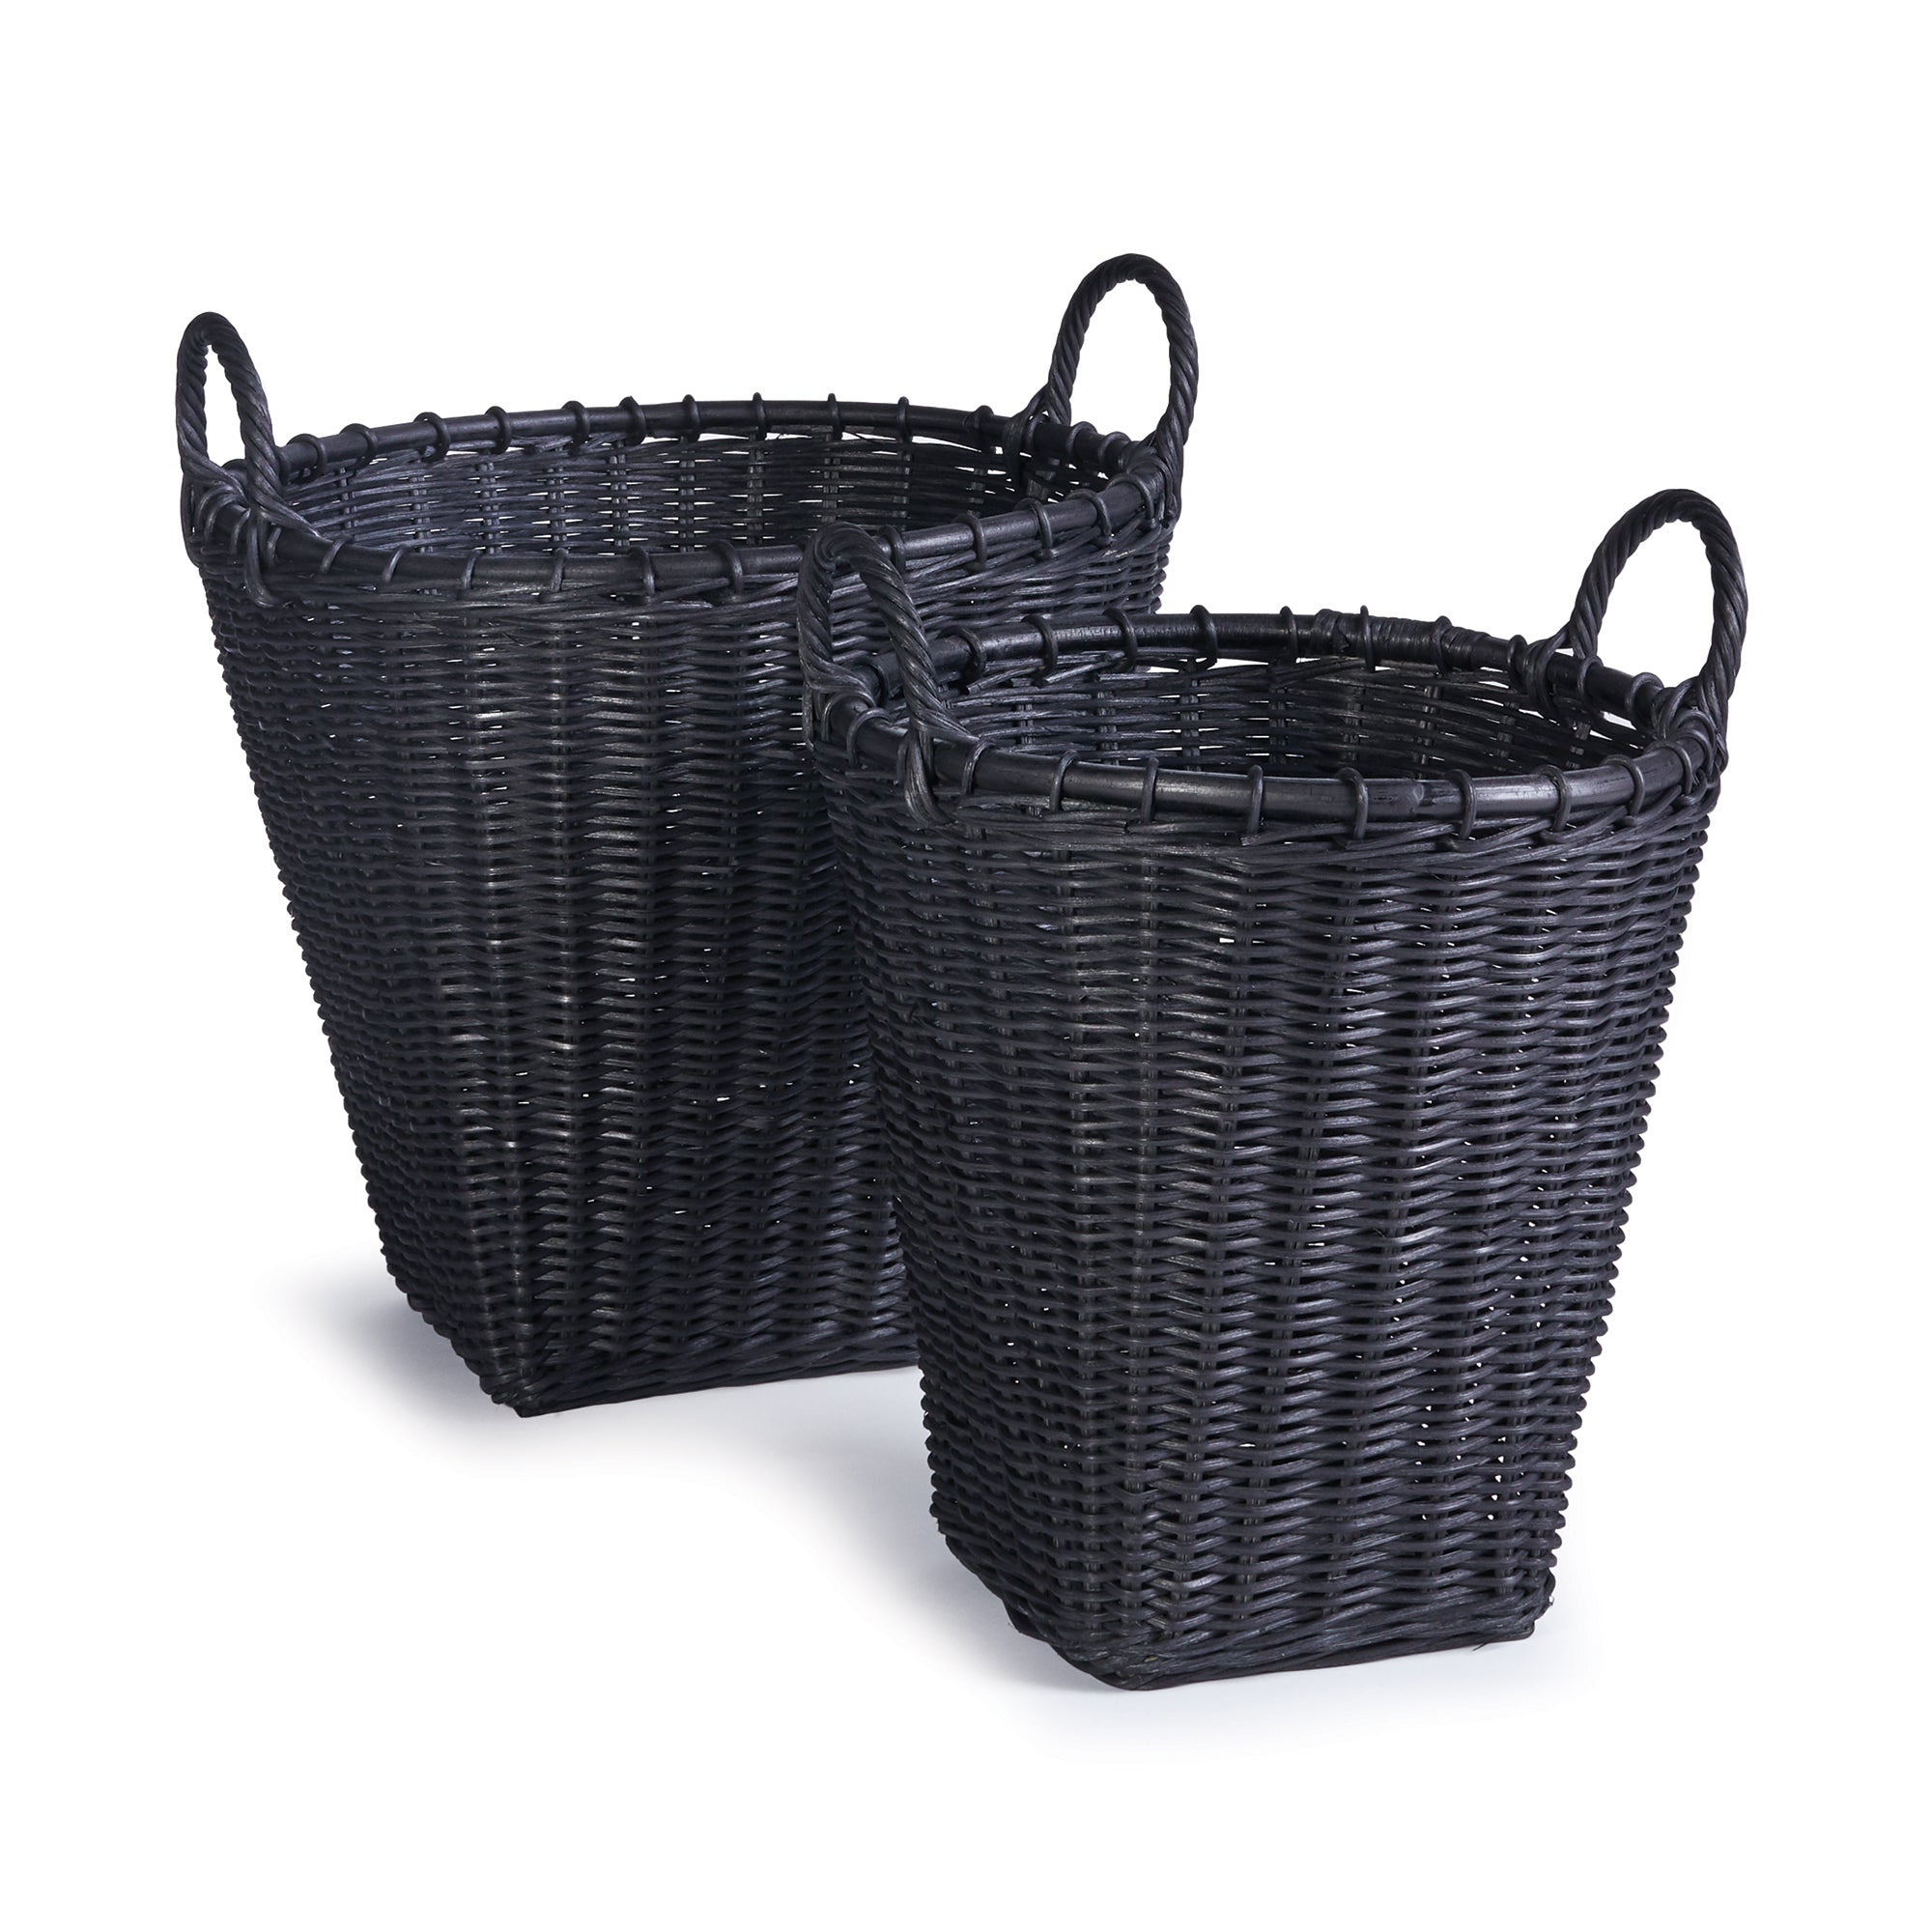 Fashion forward with a deep black finish, natural materials and enhanced weave. This is Alvero. Even the solid construction and tapered shape speak to the outstanding quality of these baskets. Amethyst Home provides interior design, new construction, custom furniture, and area rugs in the Dallas metro area.